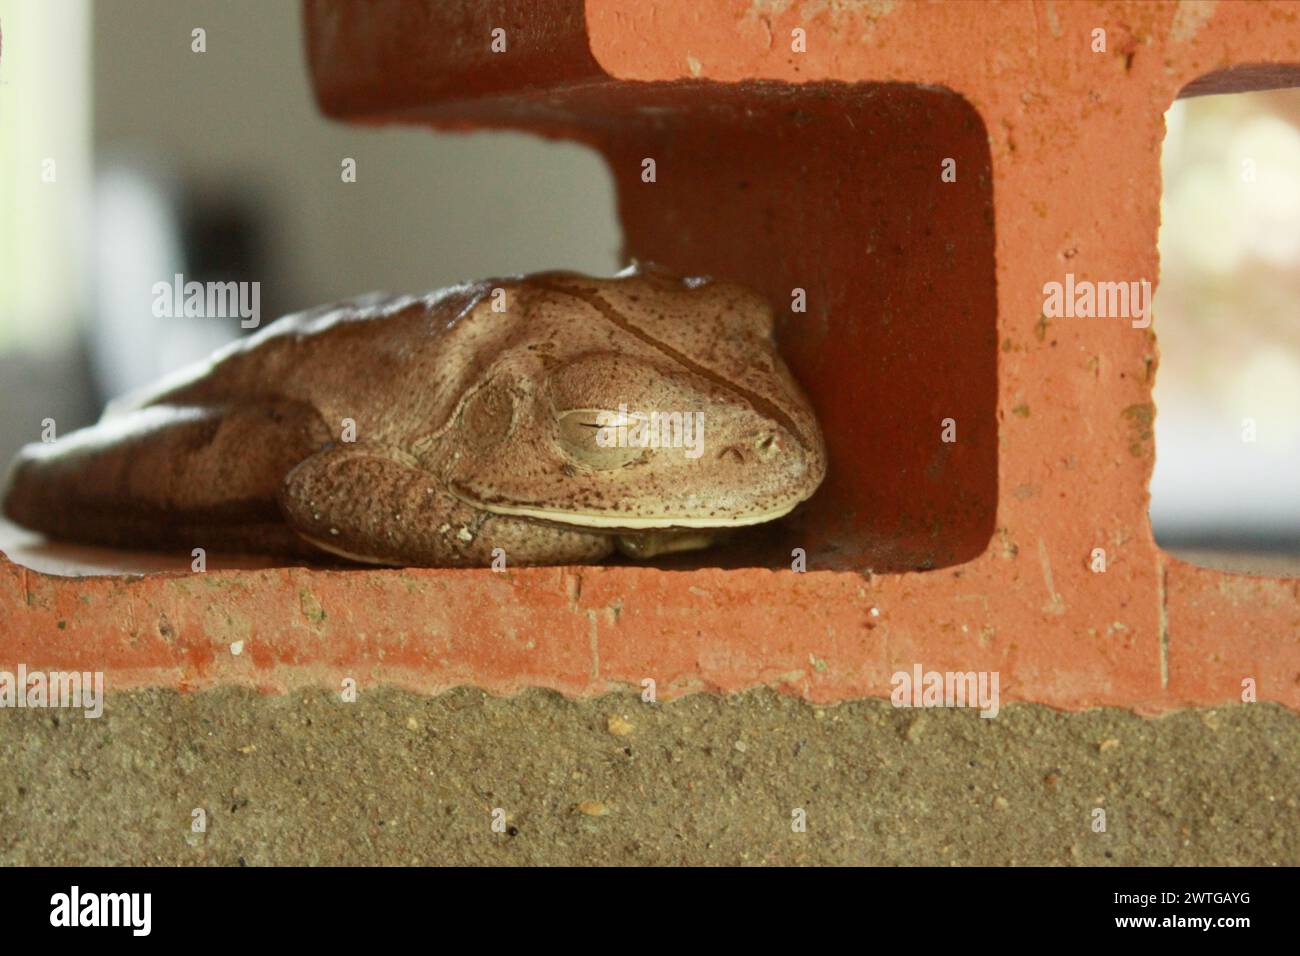 Boana Faber Treefrog, formerly Hyla Wachei, known as Hammerfrog or Blacksmith Frog. Species of amphibian, from the Hylidae family. Sleeping. Stock Photo